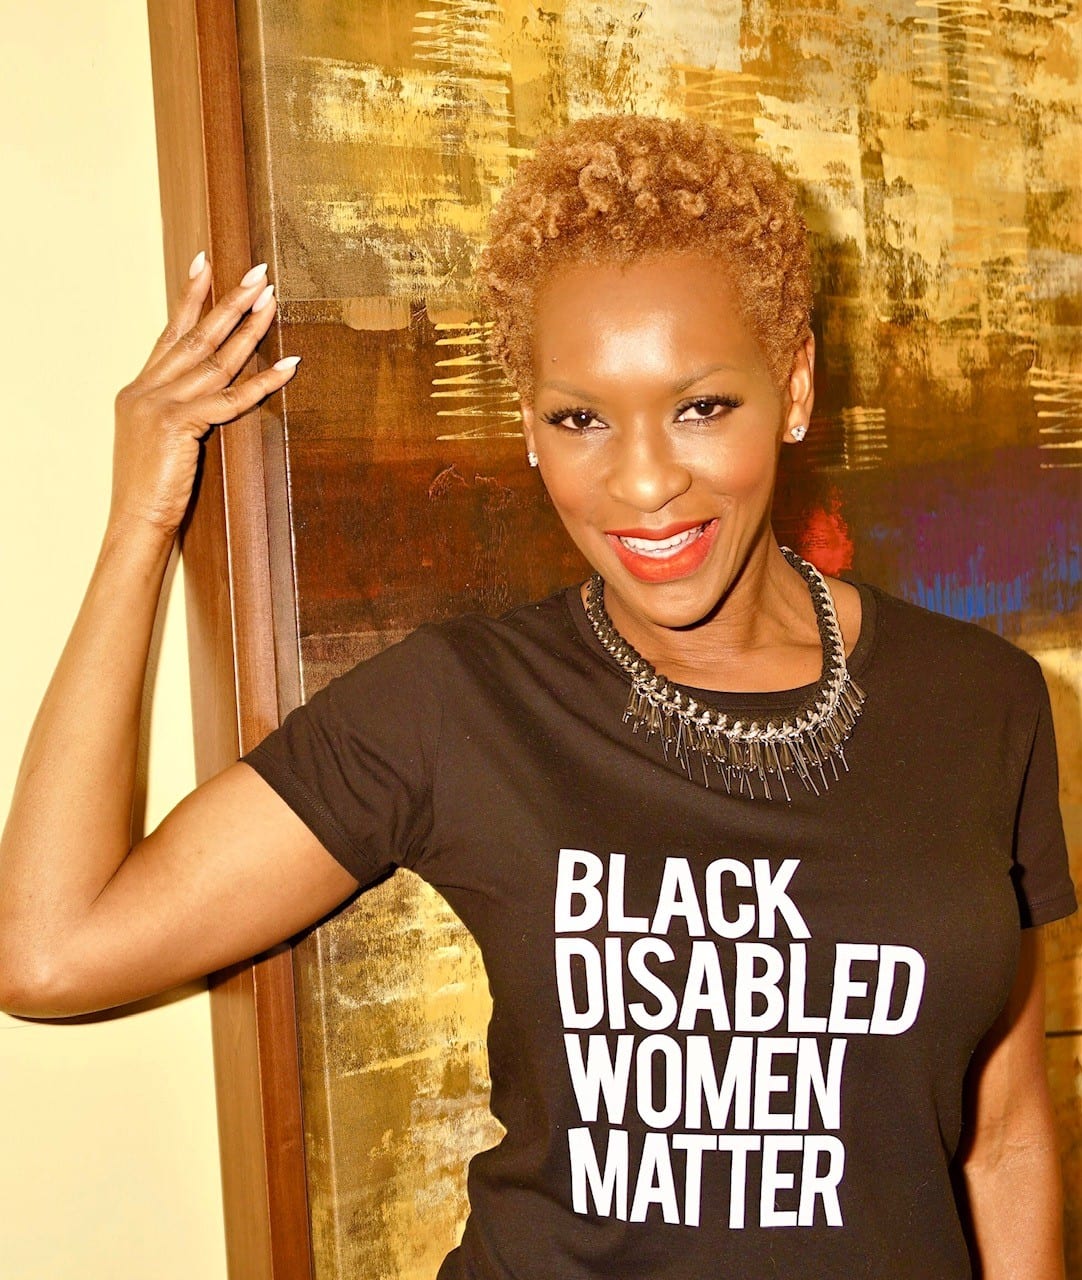 Claudia smiling looking into the camera wearing a black t-shirt with white letters that reads “Black Disabled Women Matter”